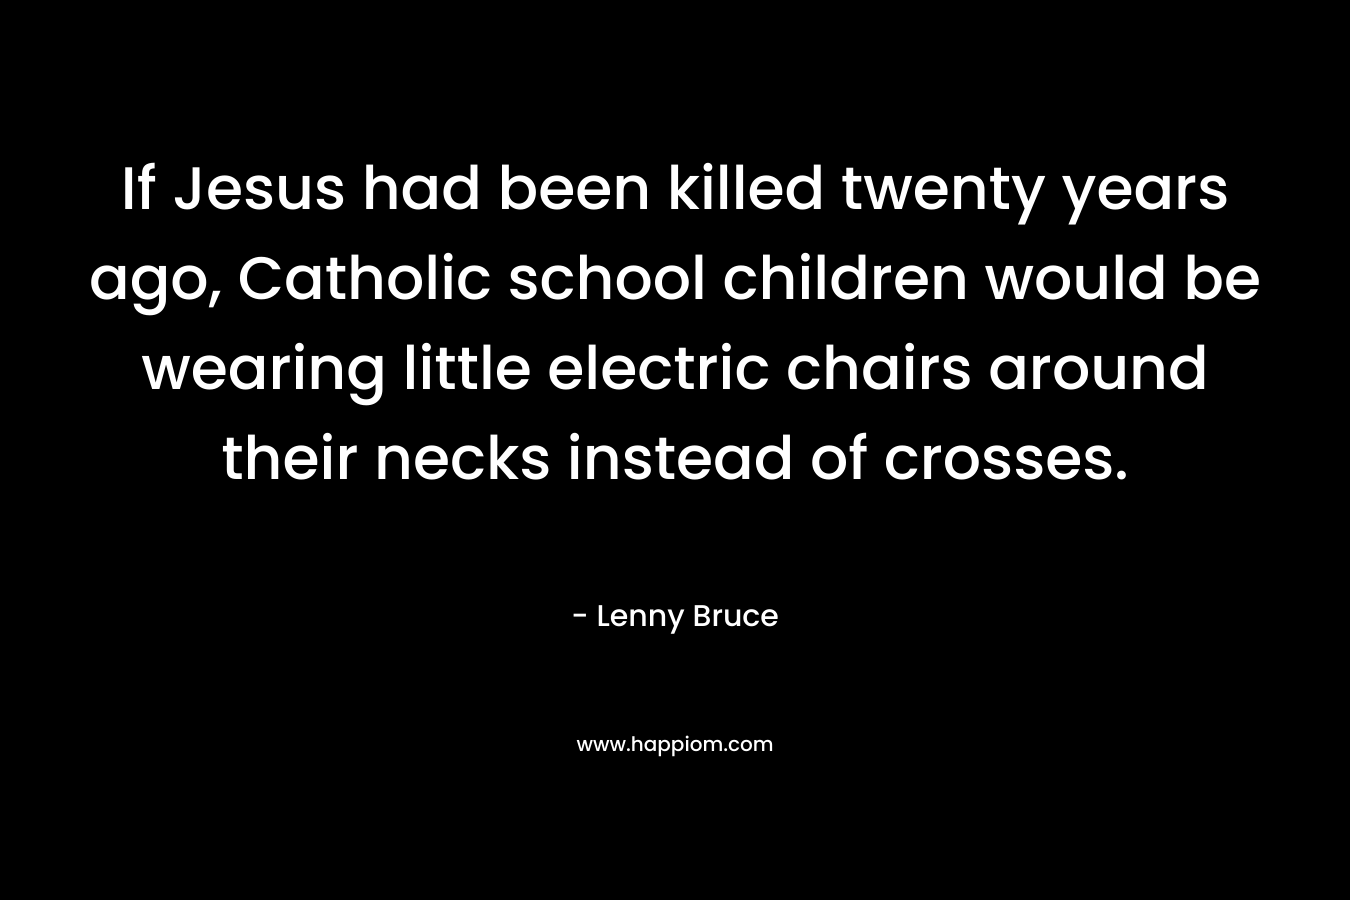 If Jesus had been killed twenty years ago, Catholic school children would be wearing little electric chairs around their necks instead of crosses. – Lenny Bruce